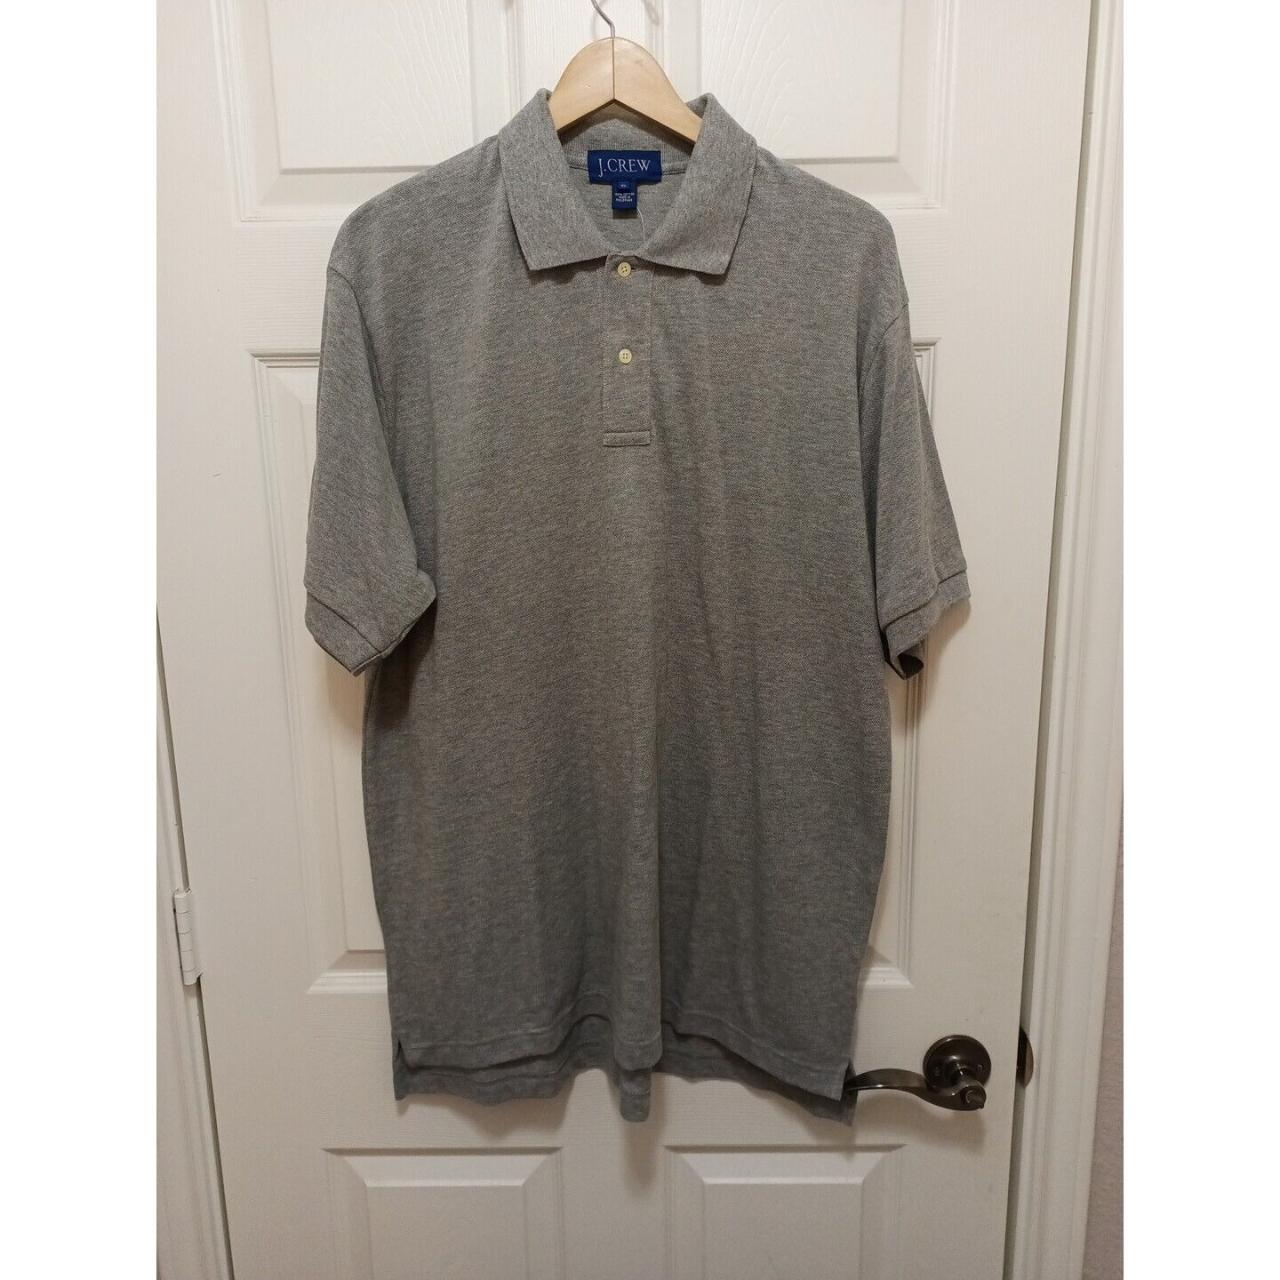 New without tags Men's J. Crew Gray Short Sleeve... - Depop